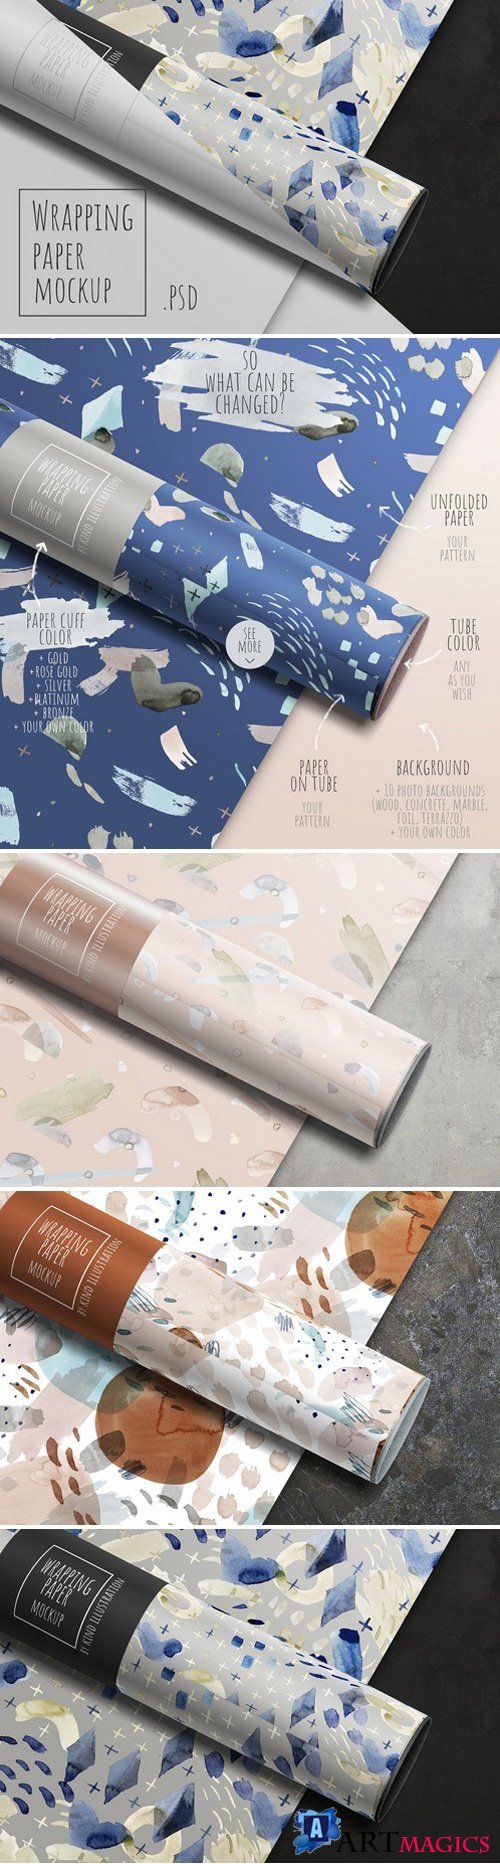 Wrapping paper mockup 2340406